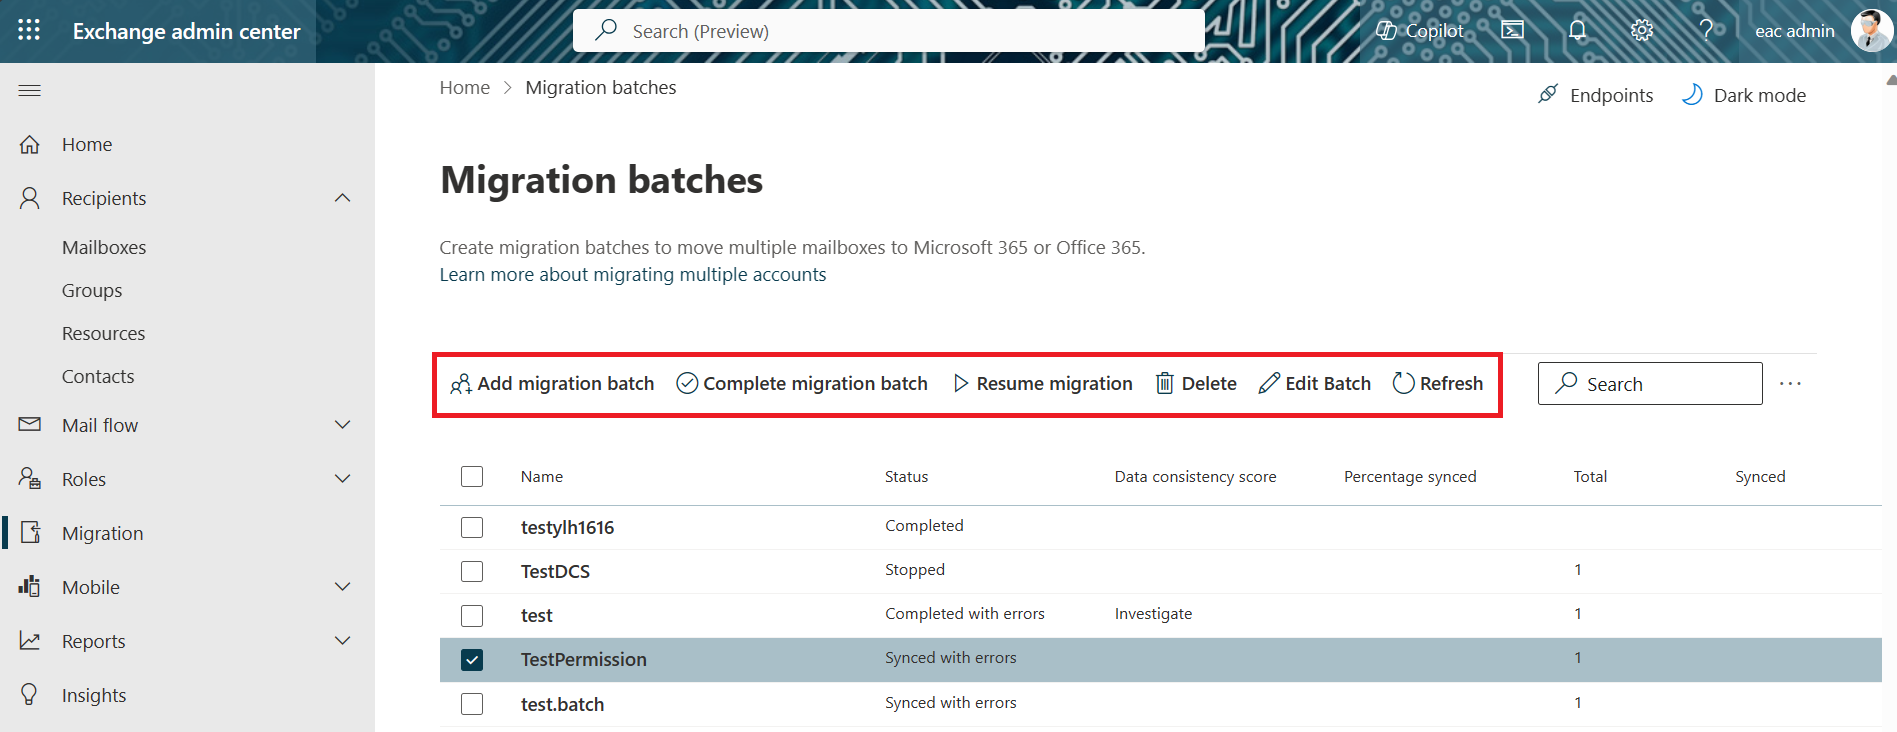 Screenshot of the Migration batches page on EAC, with the toolbar buttons highlighted.